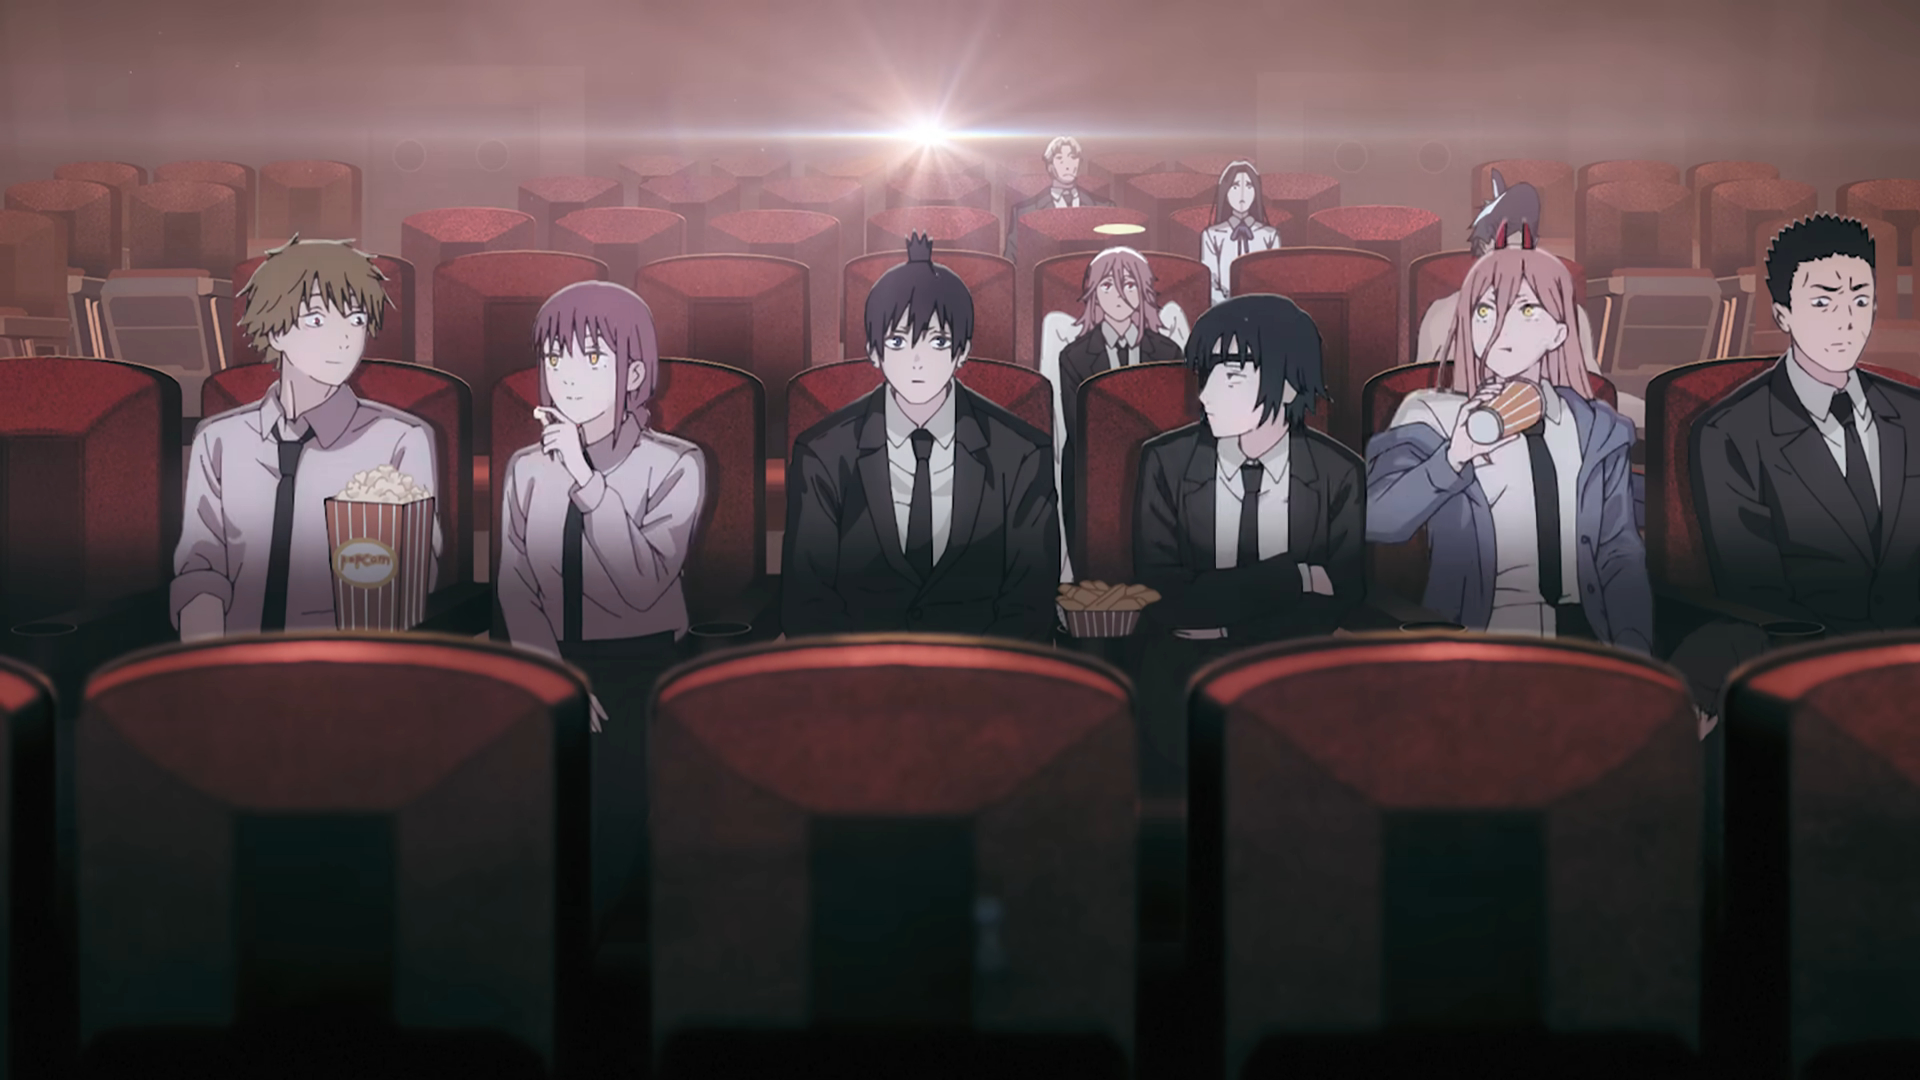 Chainsaw Man Reveals Episode 11 Ending With Song by Queen Bee - Anime Corner